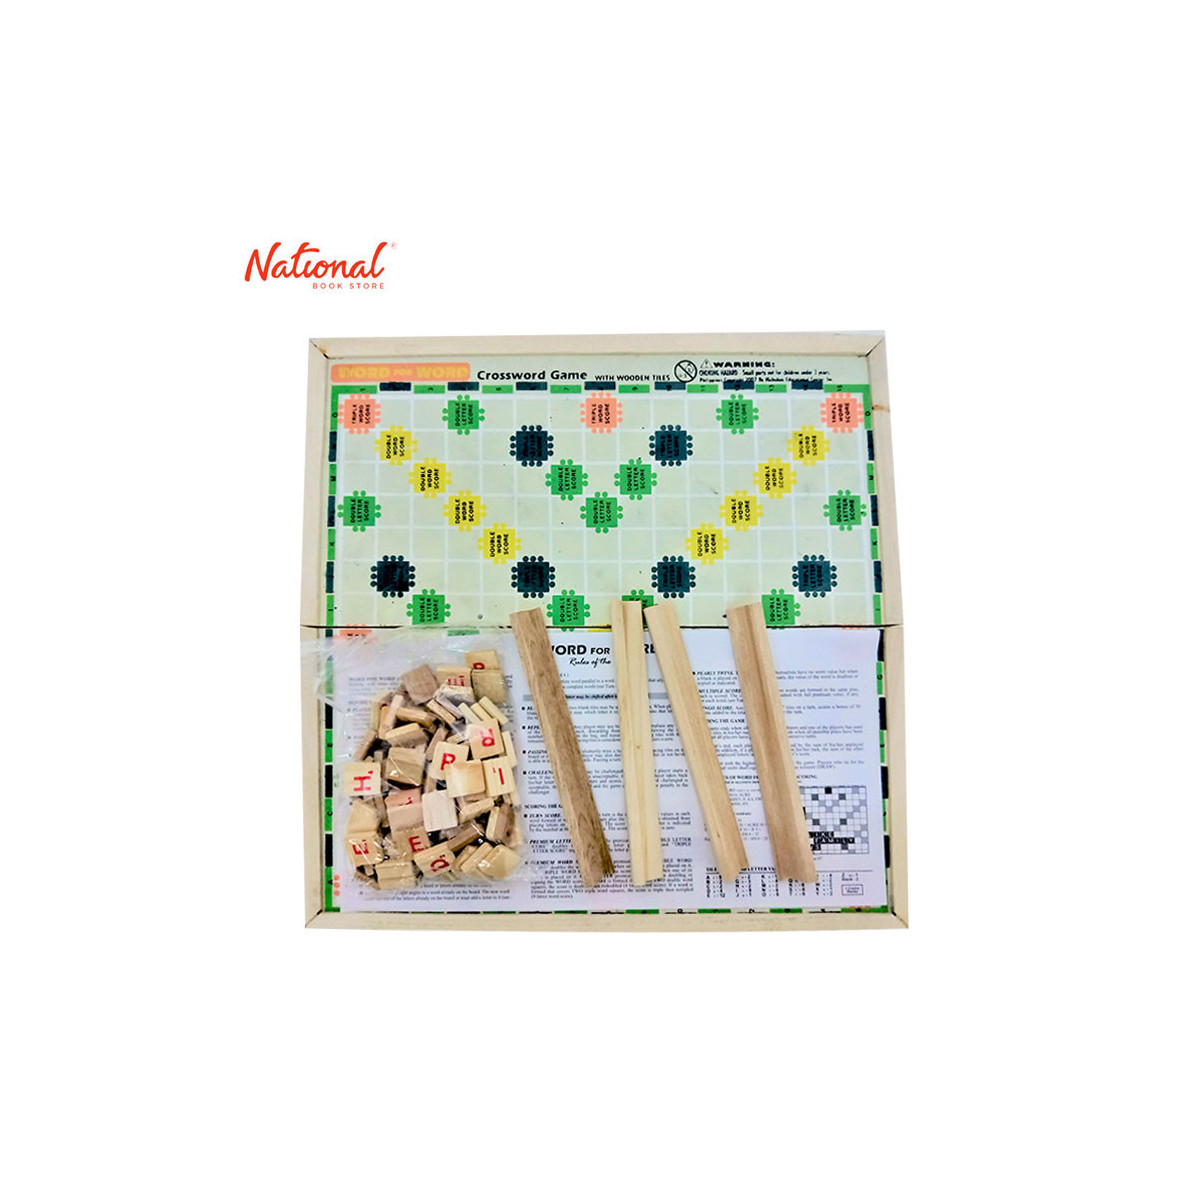 WORD FOR WORD BOARD GAME ORDINARY WITH WOODEN TILES